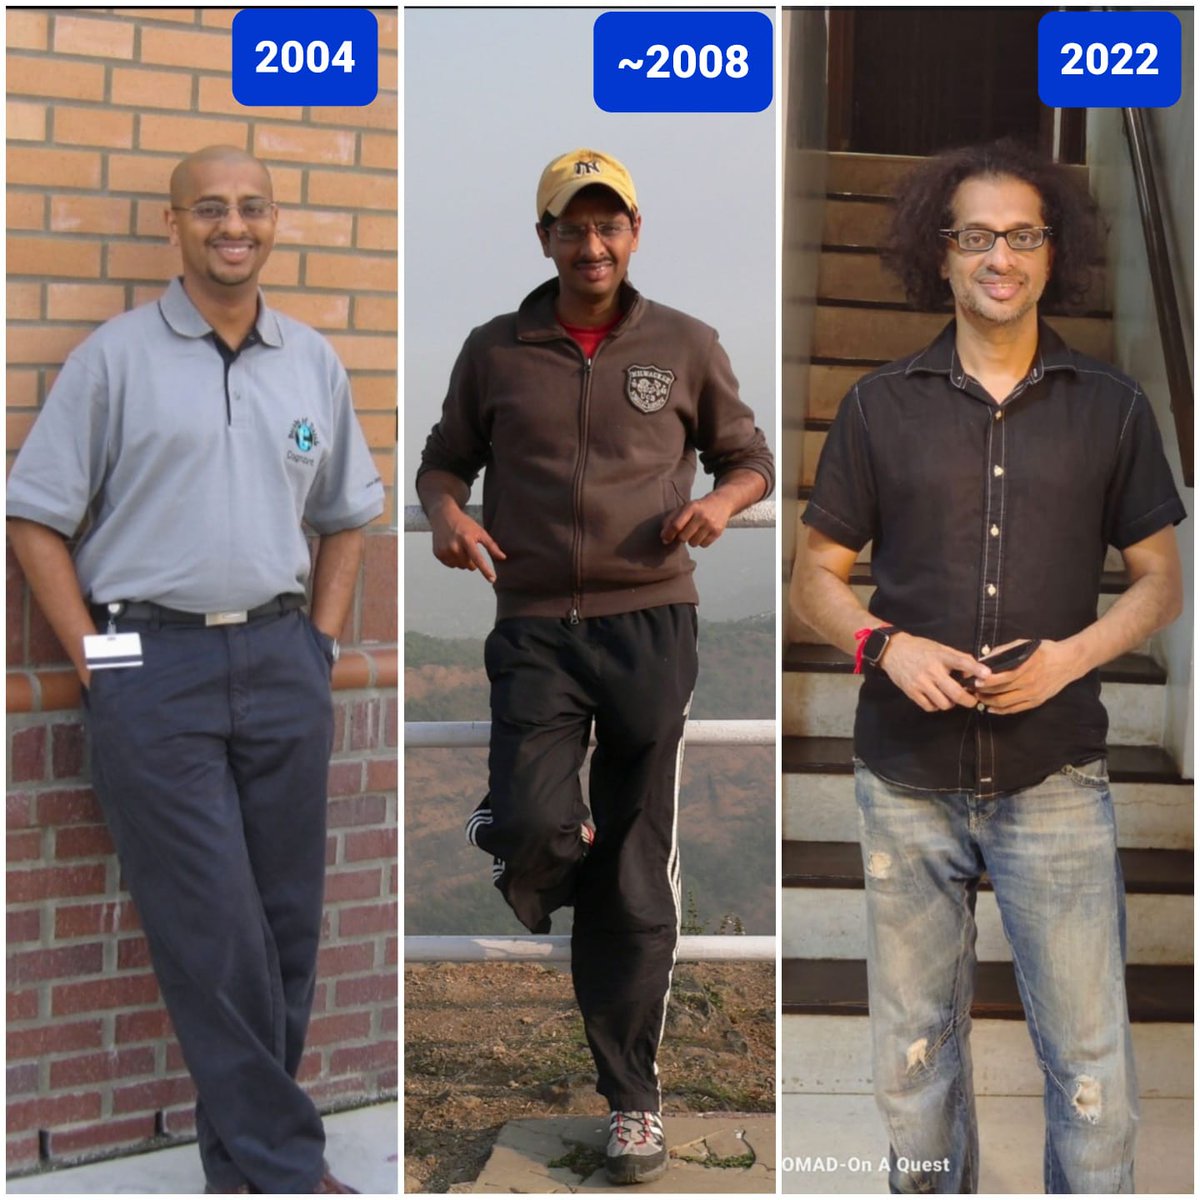 Thread #transformation #sustainable #lifestyle #locarb #fasting 2004 : Me Overweight in mid-30s 2005-06: Went thru 1st & ONLY #fatloss transformation Dropped 15 Kgs in <8 months Maintained same weight range /frame for last 17+ years by adhering to structured lifestyle (1/4)